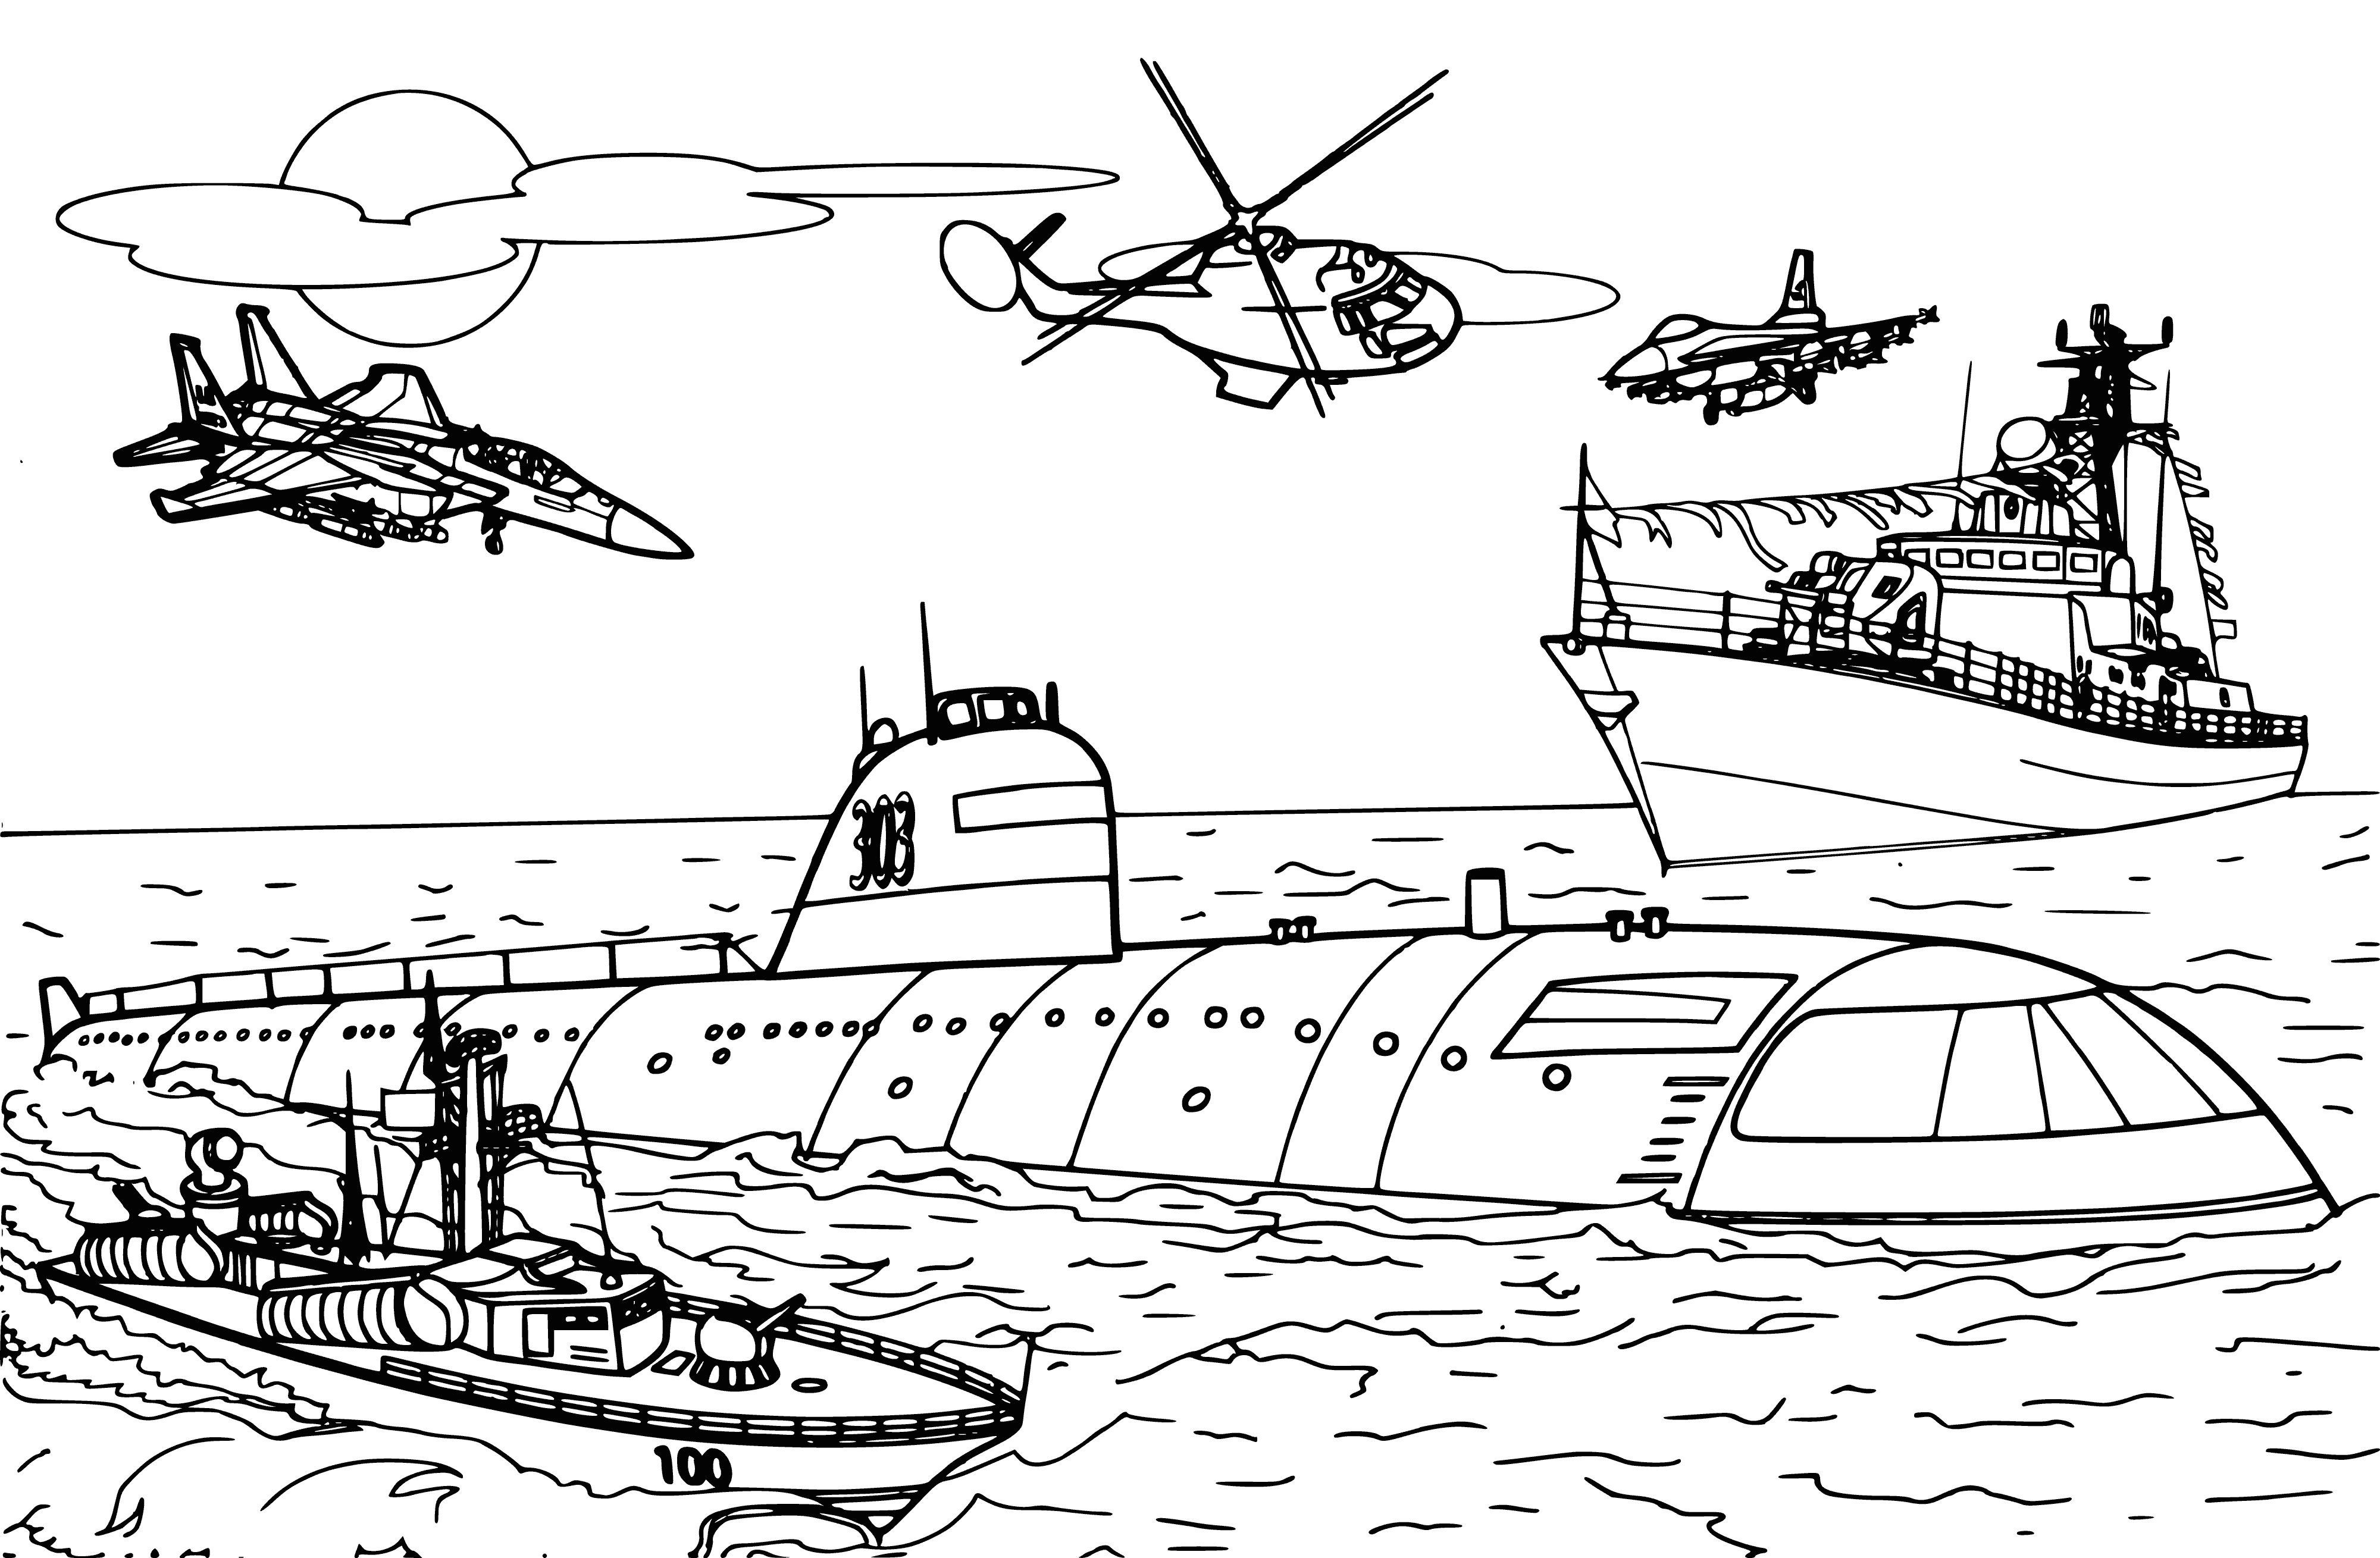 coloring page: This coloring page has various boats including fishing boats, sailboats, and a yacht of different sizes and shapes.